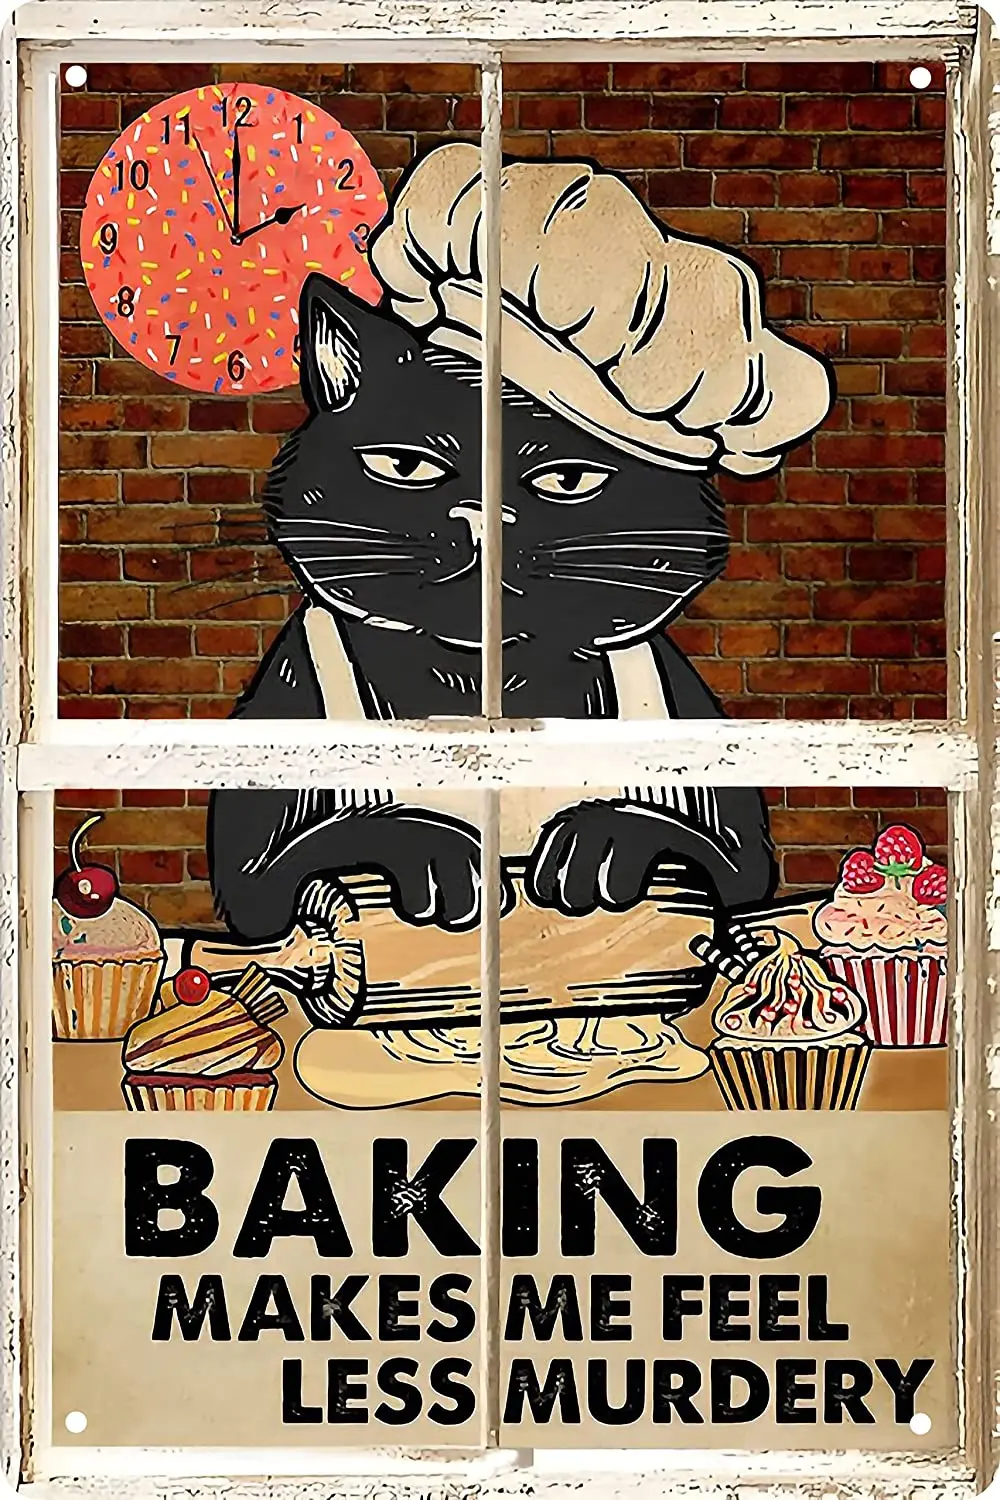 

Bake Lovers Retro Metal Tin Sign Baking Makes Me Feel Less Murdery Vintage Art for Home Office Room Coffee Bar Wall Decor Poster